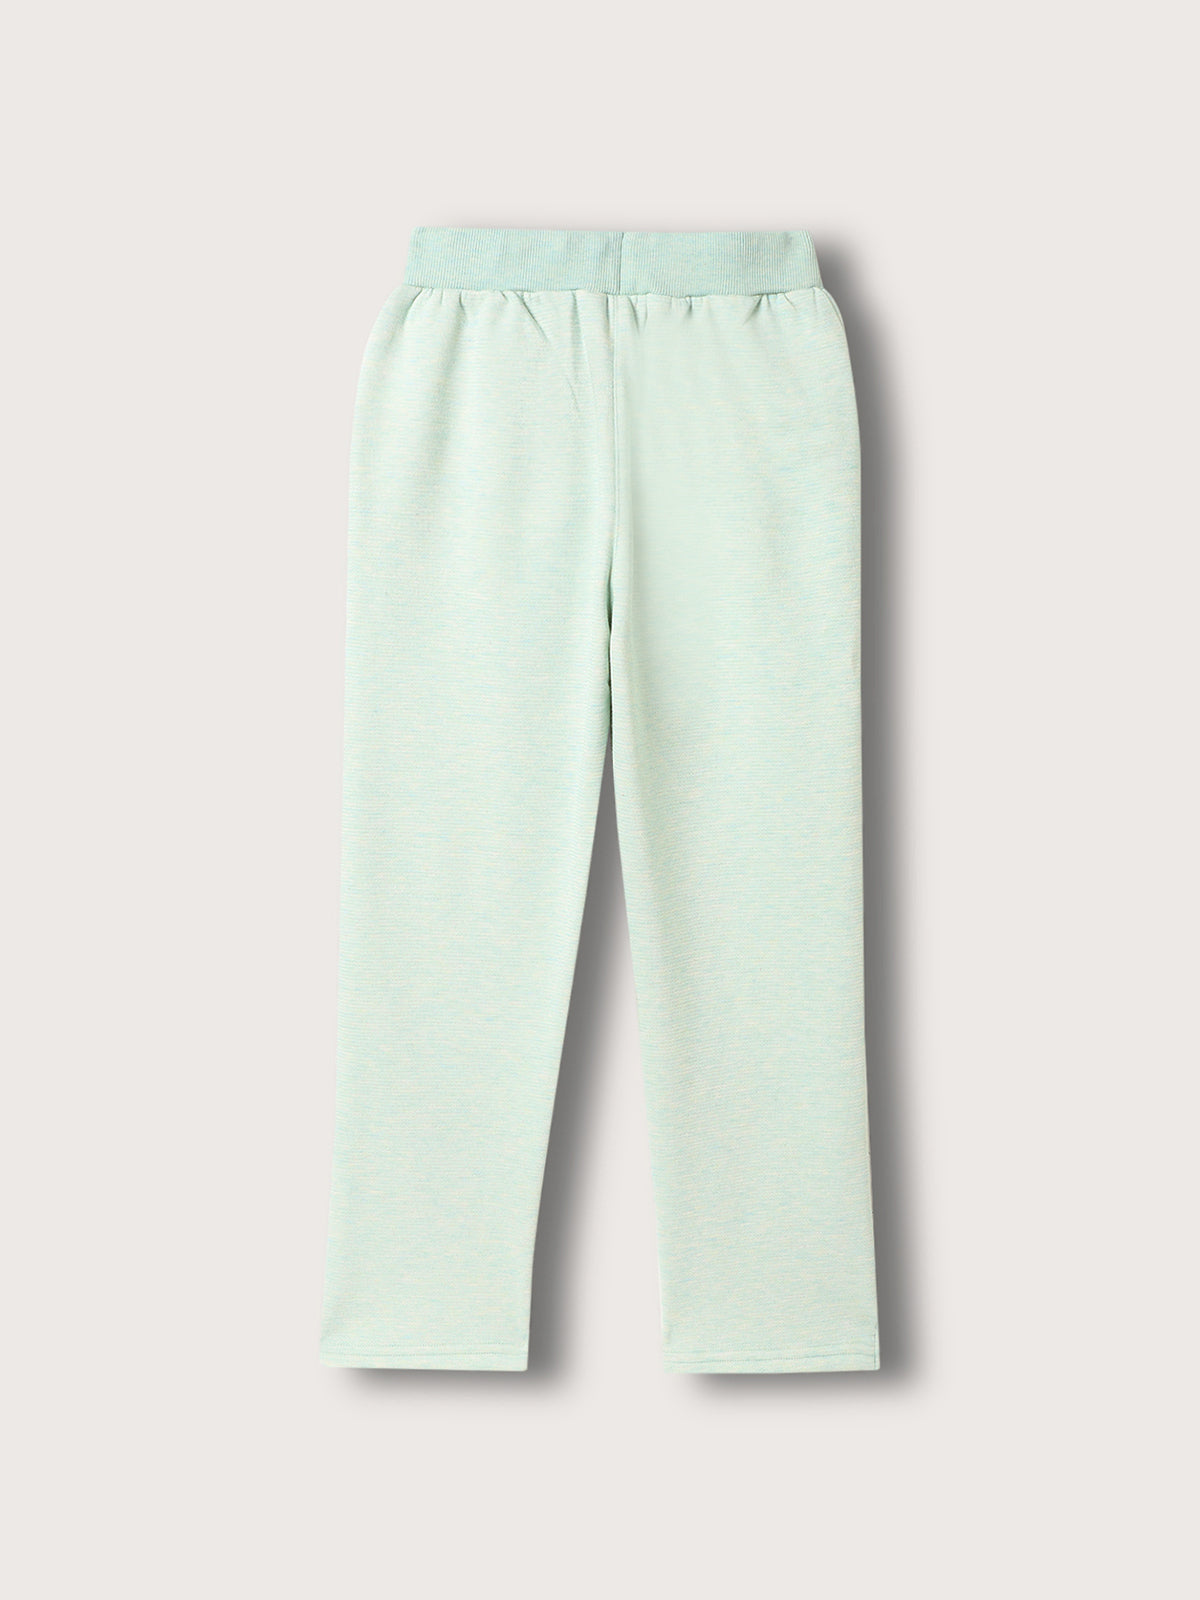 Elle Kids Girls Green Solid Straight Fit Sweatpant